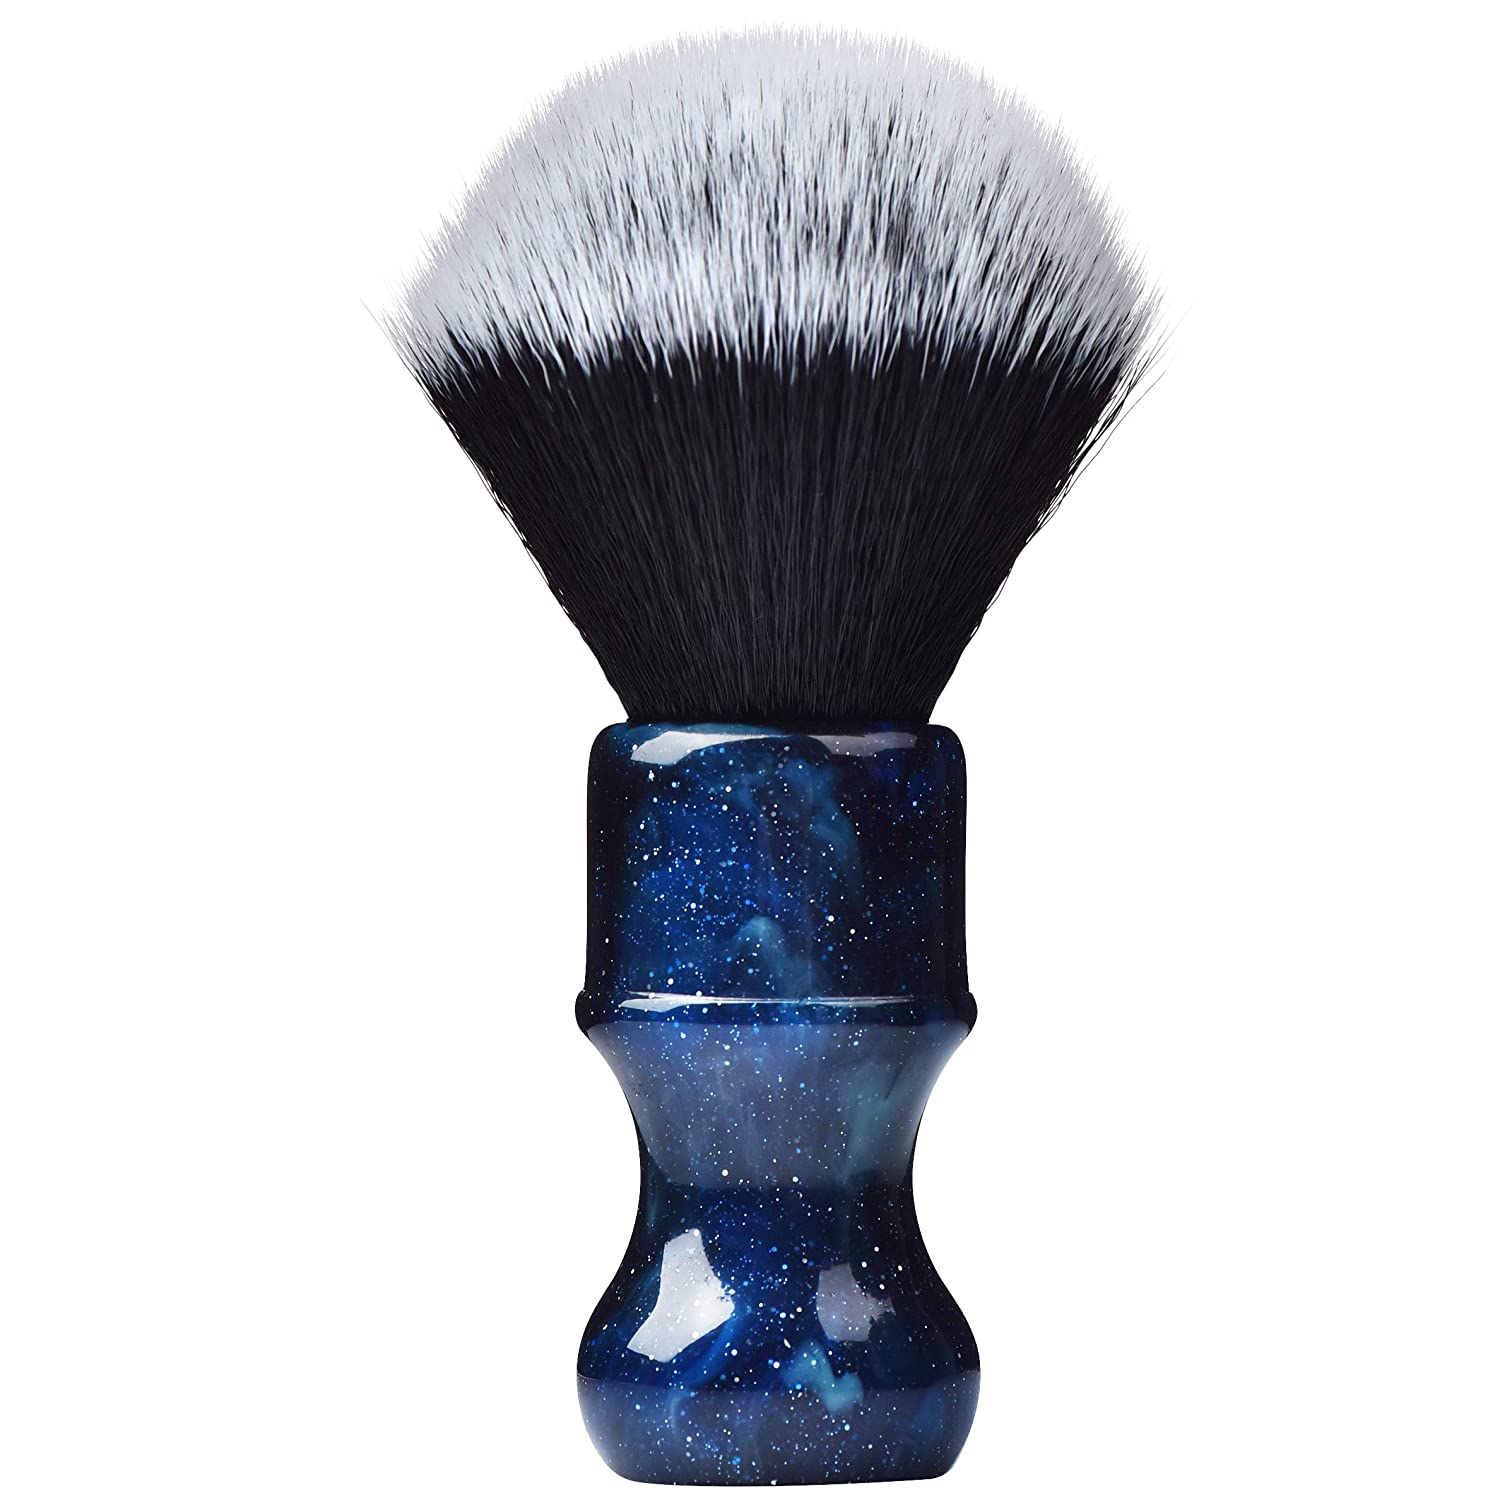 
Je&Co Luxury Synthetic Shaving Brush With Aesthetic Resin Handle, 24mm Extra Dense Knot
